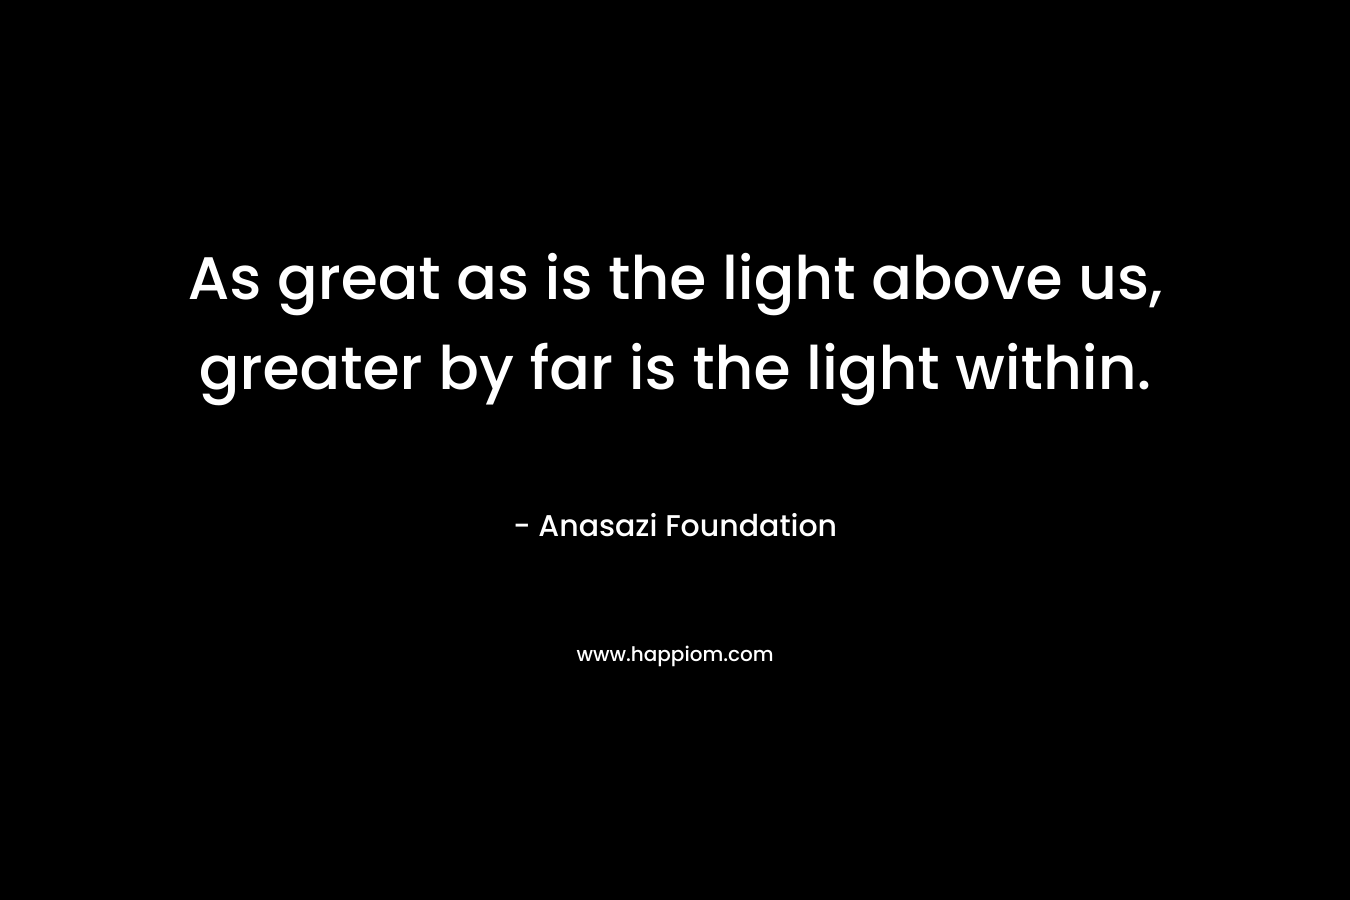 As great as is the light above us, greater by far is the light within.